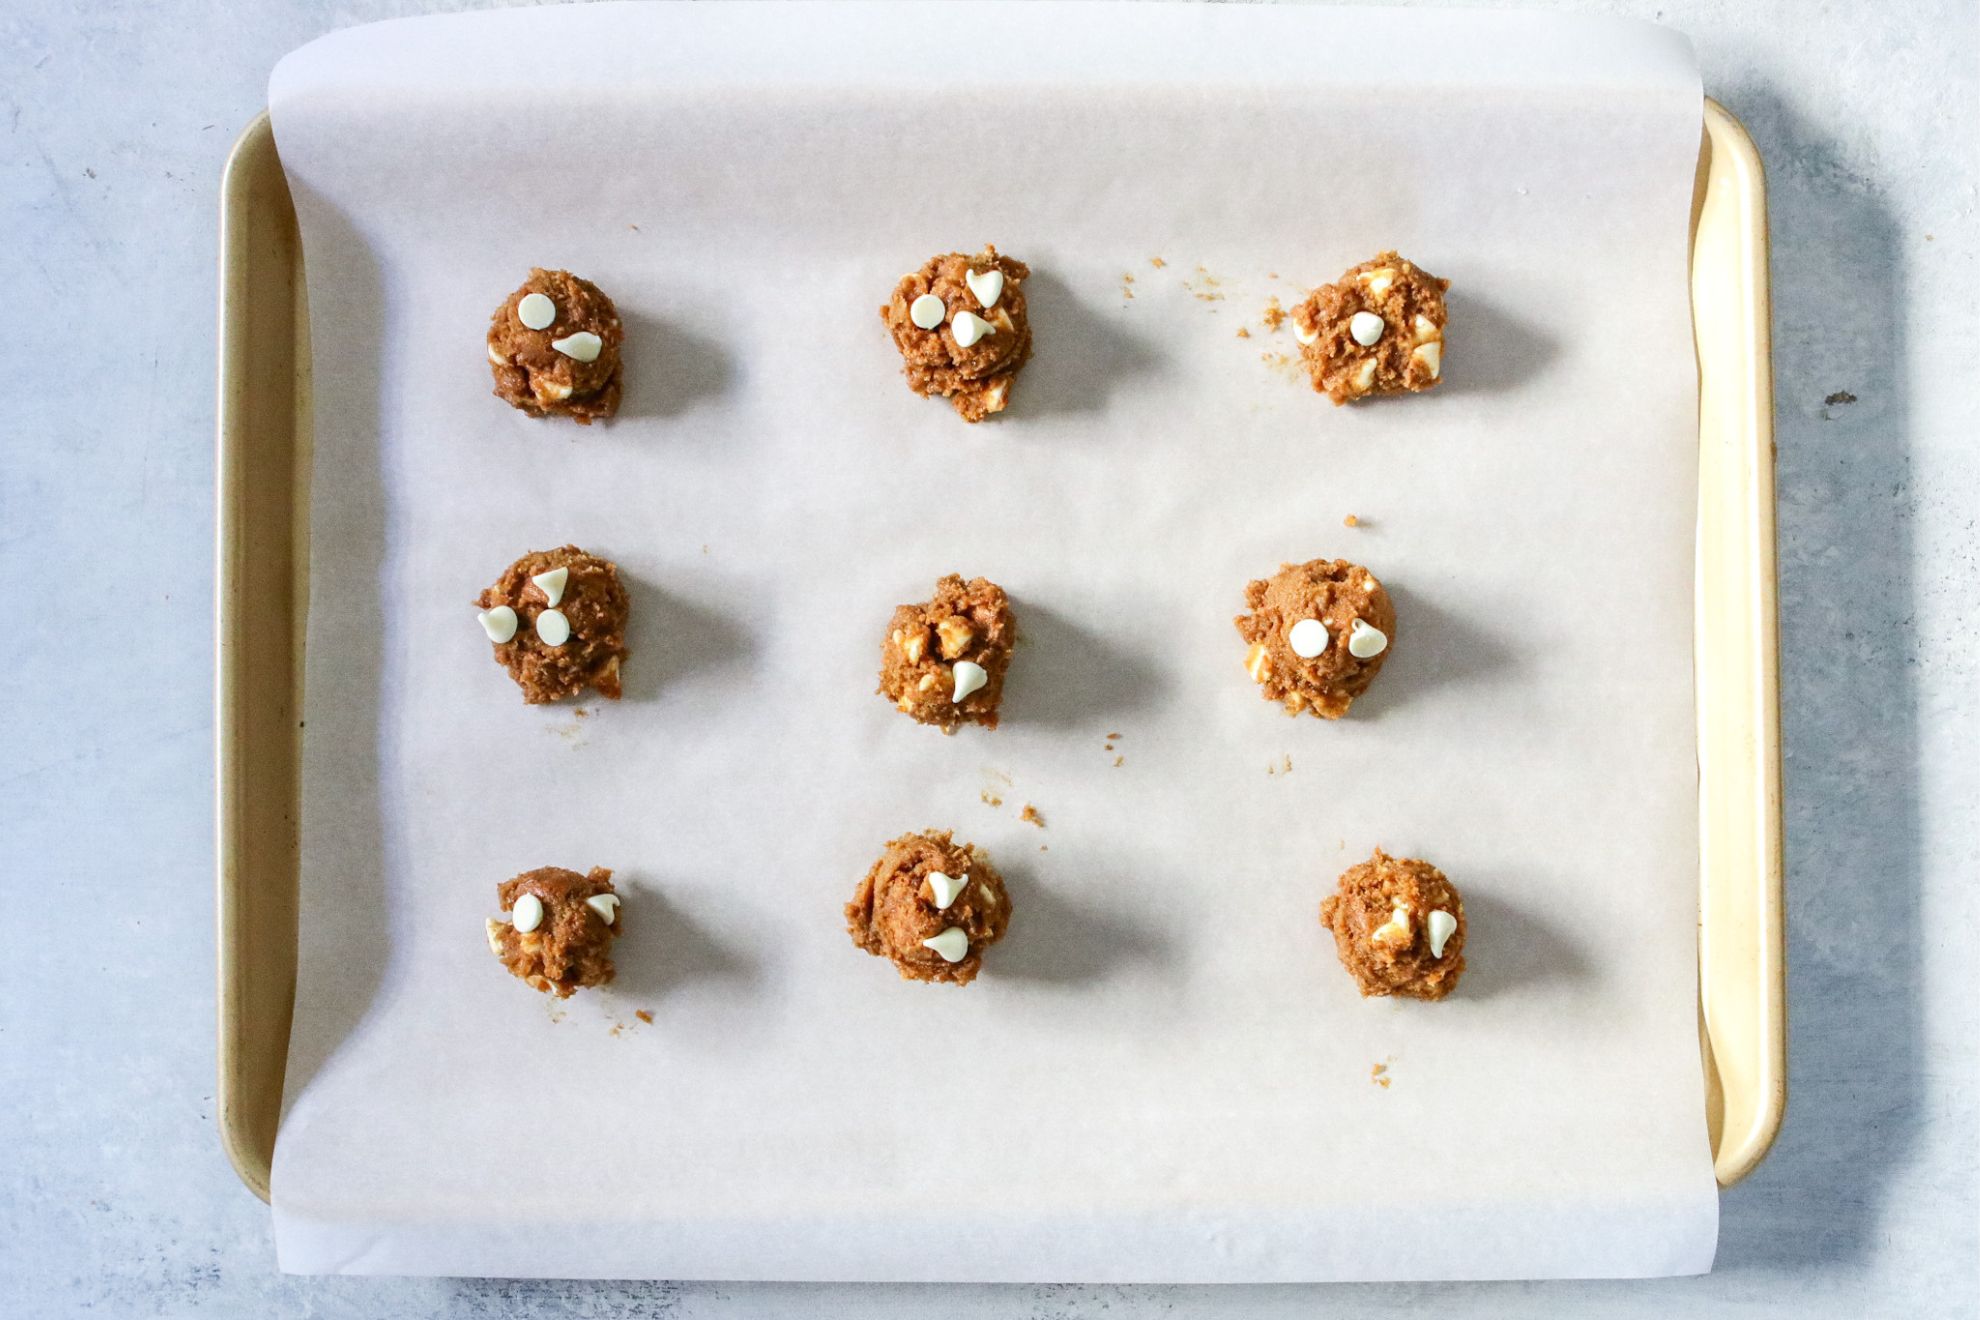 This is an overhead horizontal image of a gold rimmed baking sheet lined with white parchment paper. On the baking sheet is nine cookie dough balls topped with white chocolate chips. The baking sheet sits on a light grey surface.